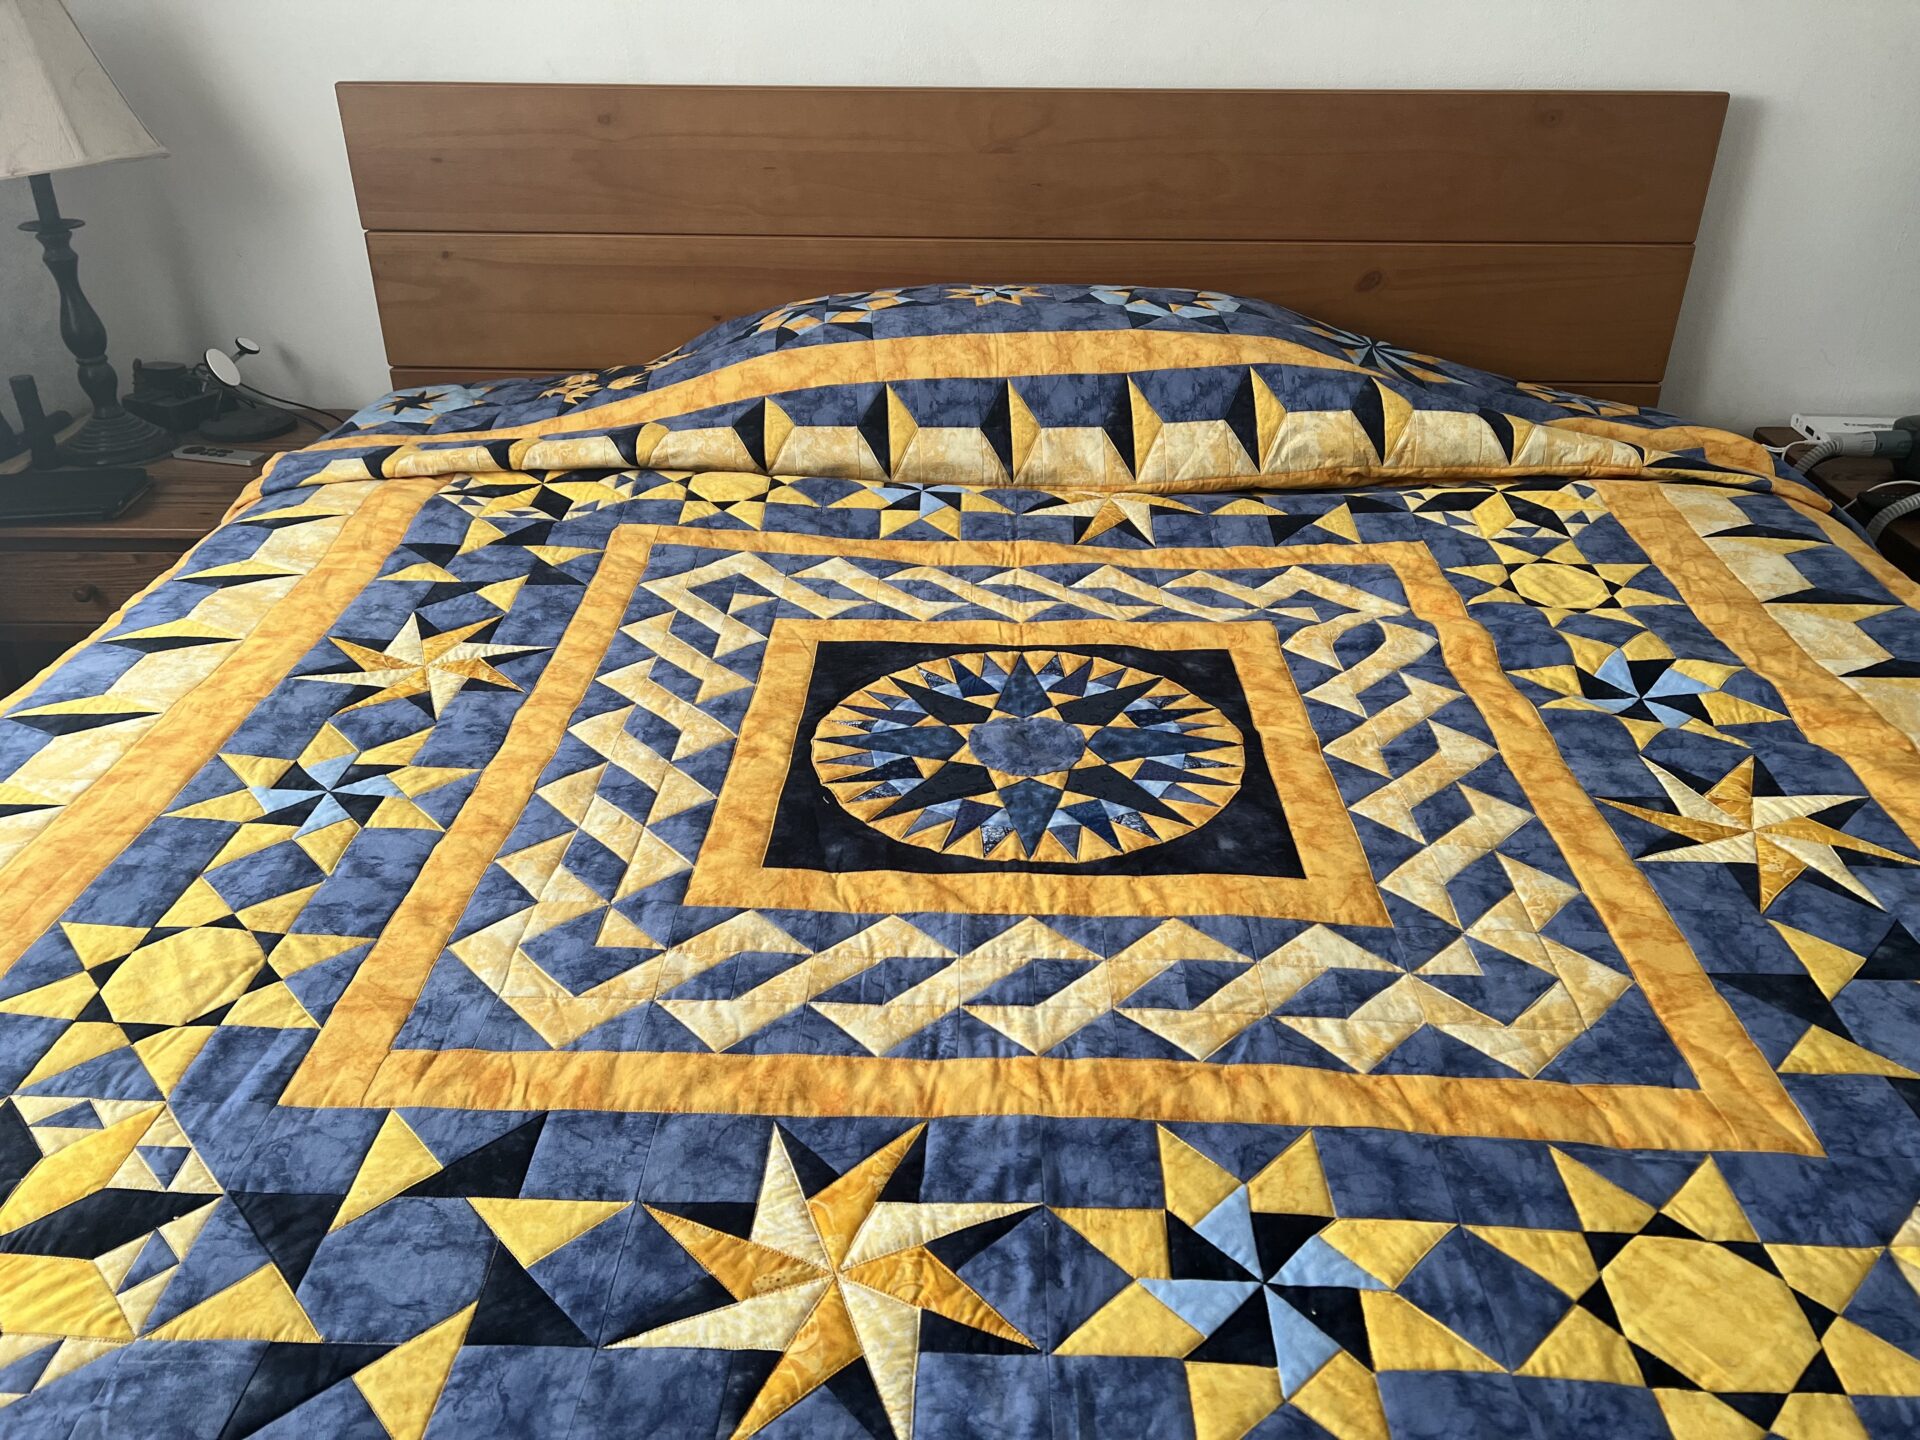 A blue, yellow, and gold tumbling blocks quilt on a king sized bed.